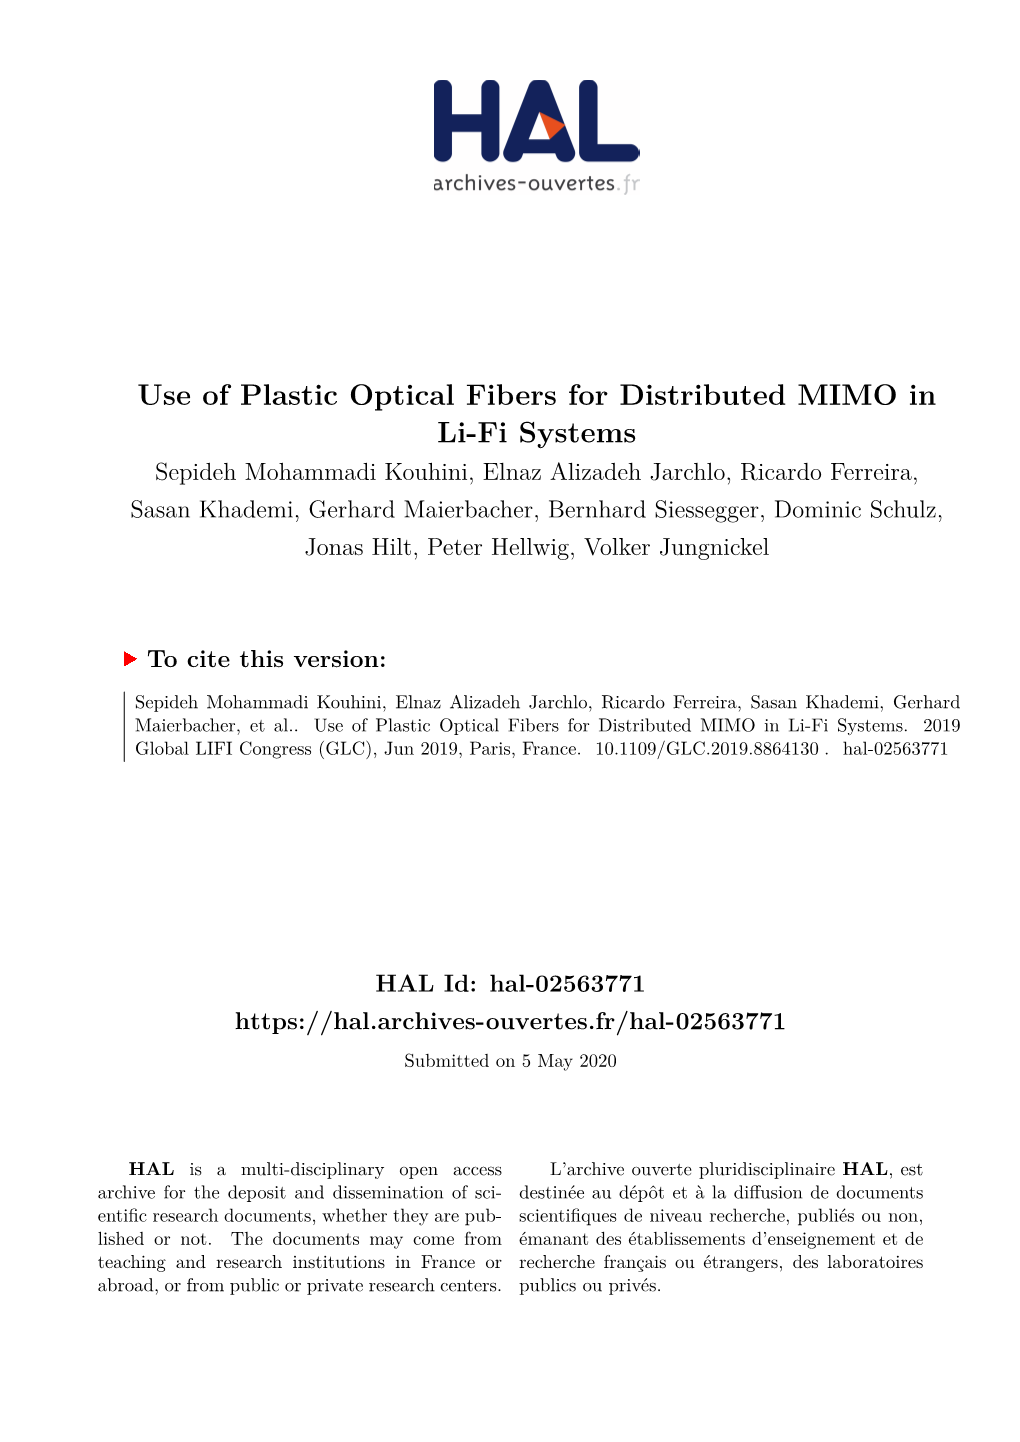 Use of Plastic Optical Fibers for Distributed MIMO in Li-Fi Systems